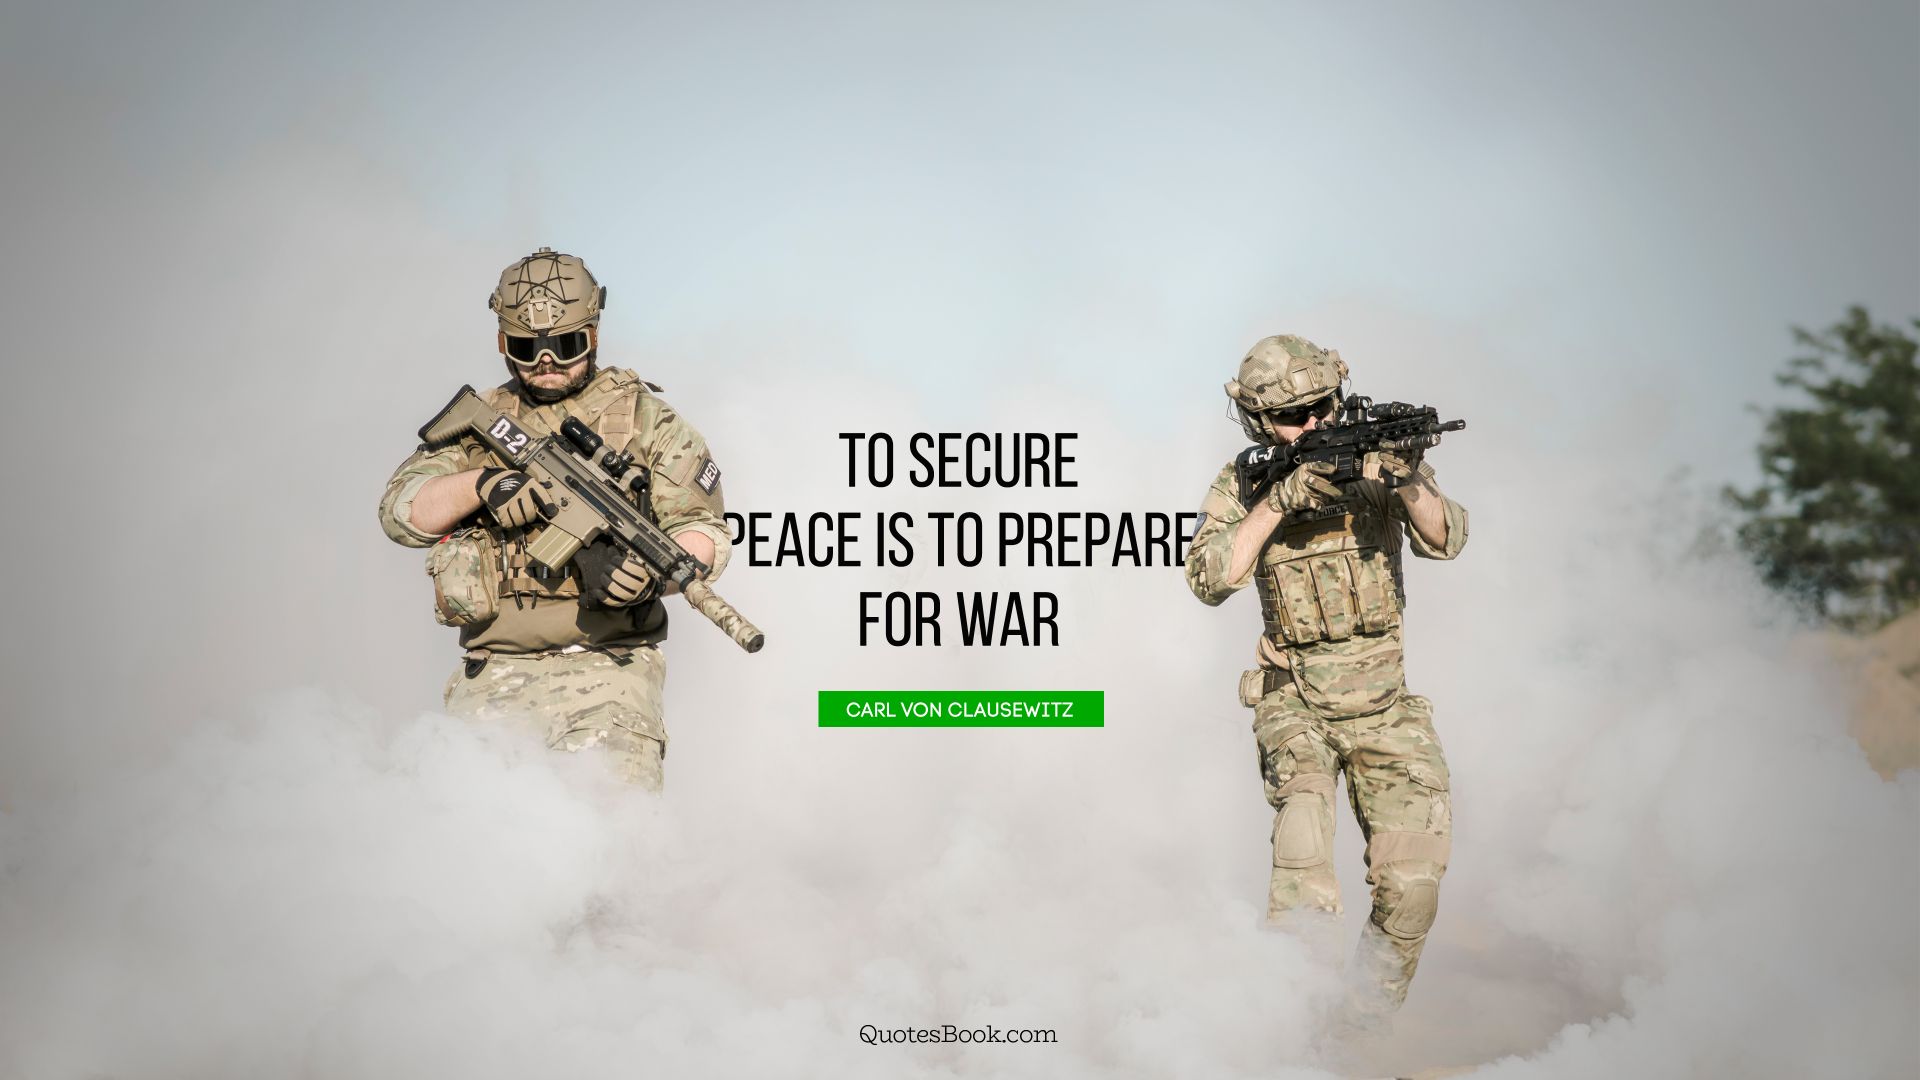 To secure peace is to prepare for war. - Quote by Carl von Clausewitz